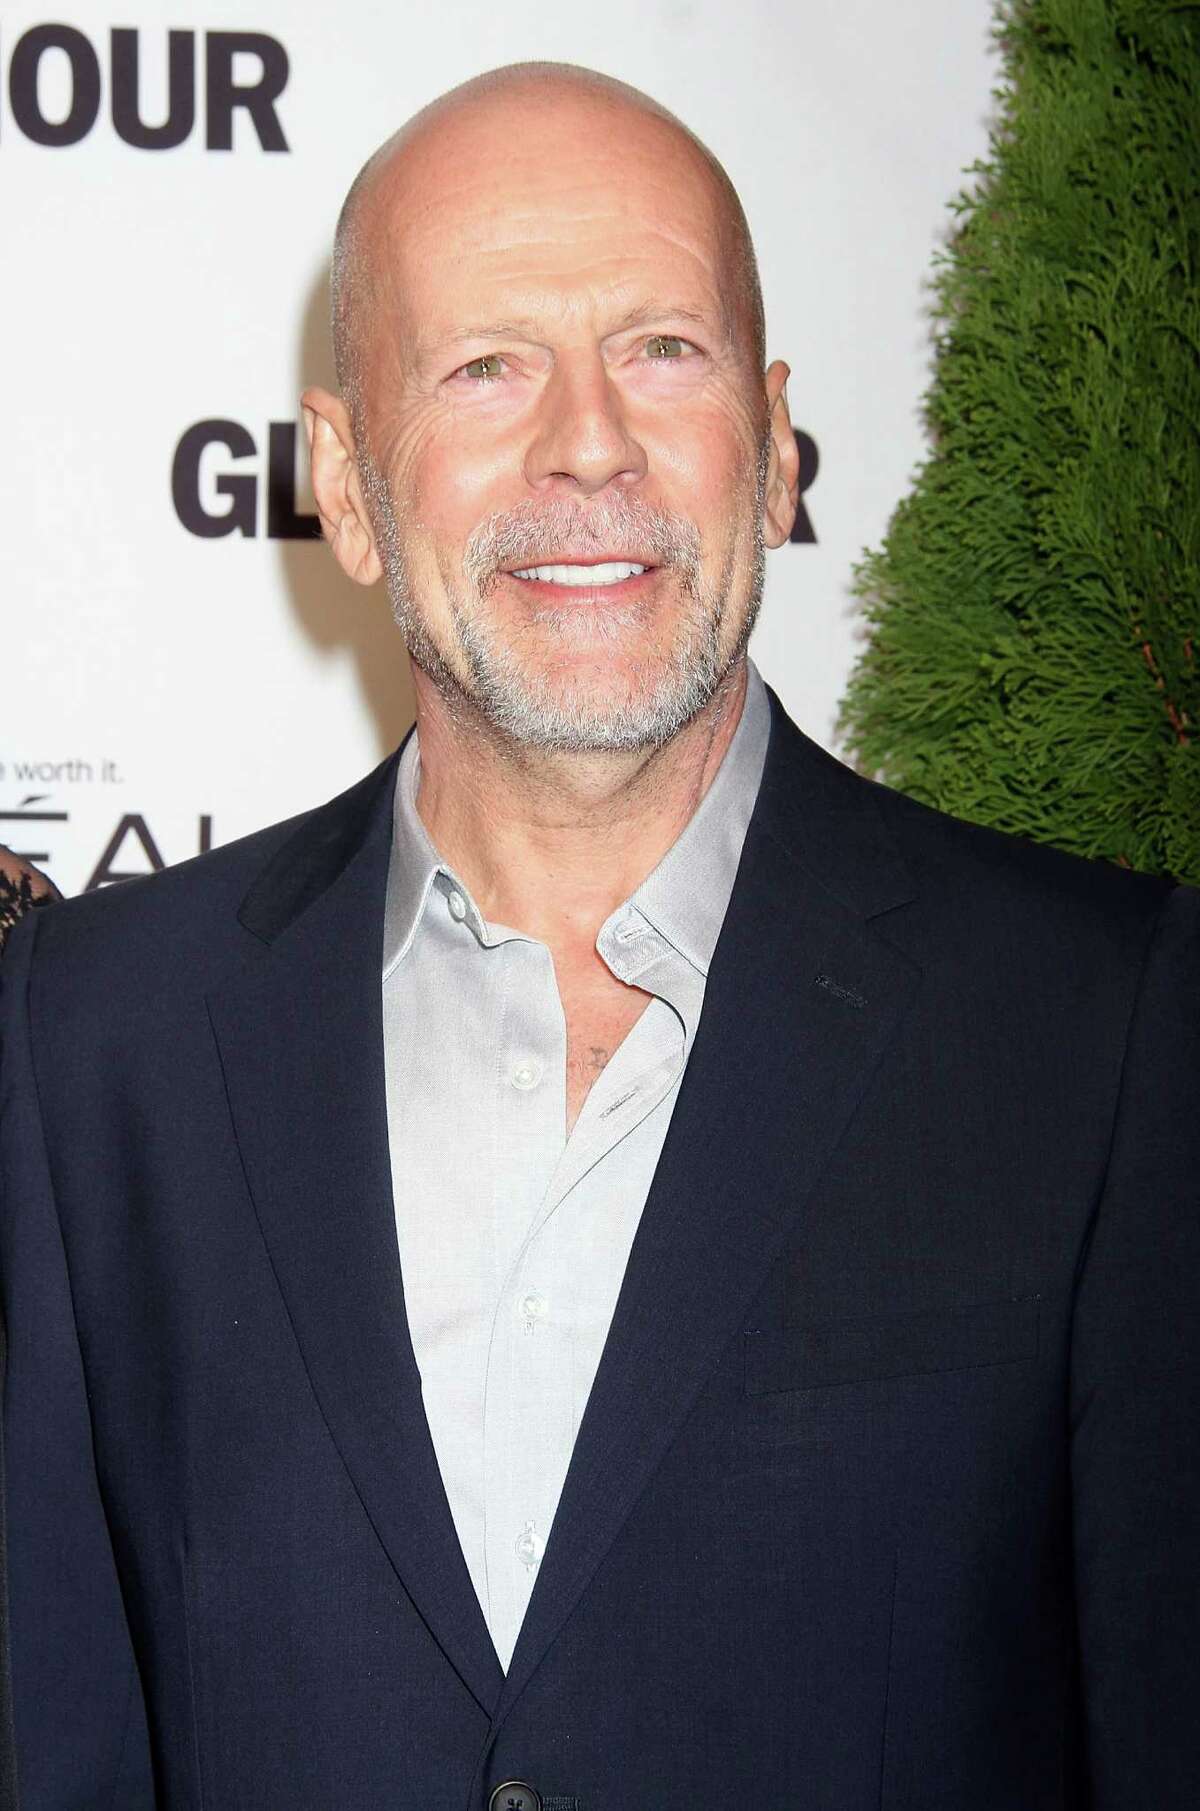 NEW YORK, NY - NOVEMBER 10: Bruce Willis attends the 2014 Glamour Women Of The Year Awards at Carnegie Hall on November 10, 2014 in New York City. (Photo by Laura Cavanaugh/FilmMagic)